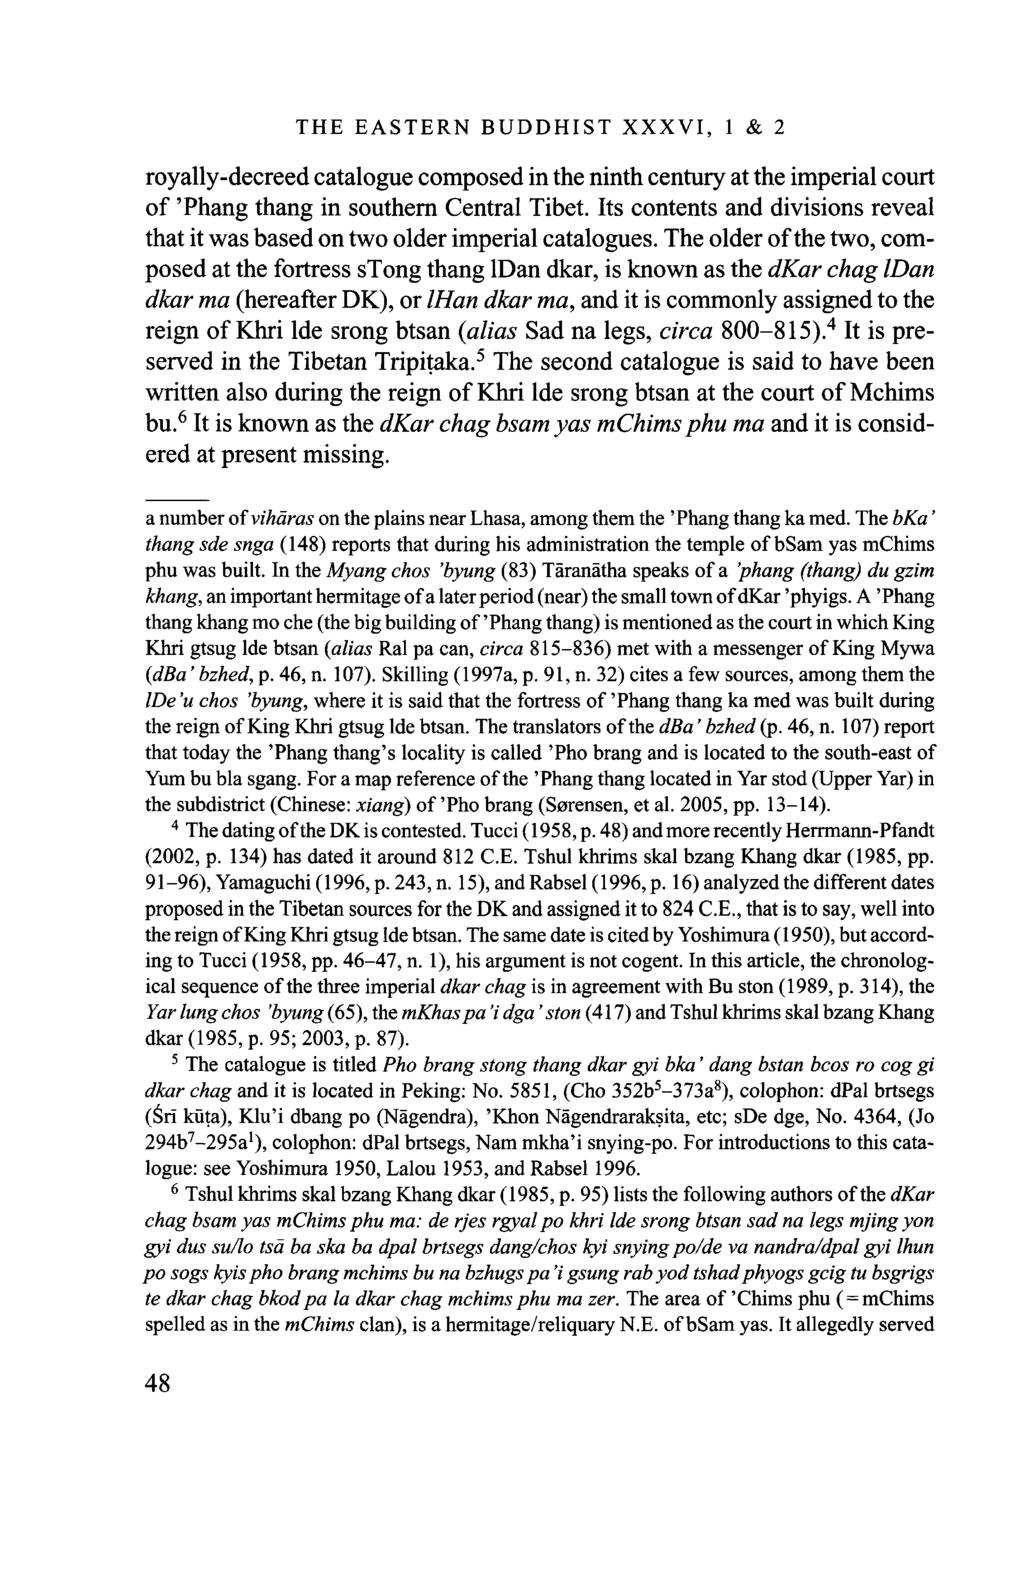 THE EASTERN BUDDHIST XXXVI, 1 & 2 royally-decreed catalogue composed in the ninth century at the imperial court of 'Phang thang in southern Central Tibet.